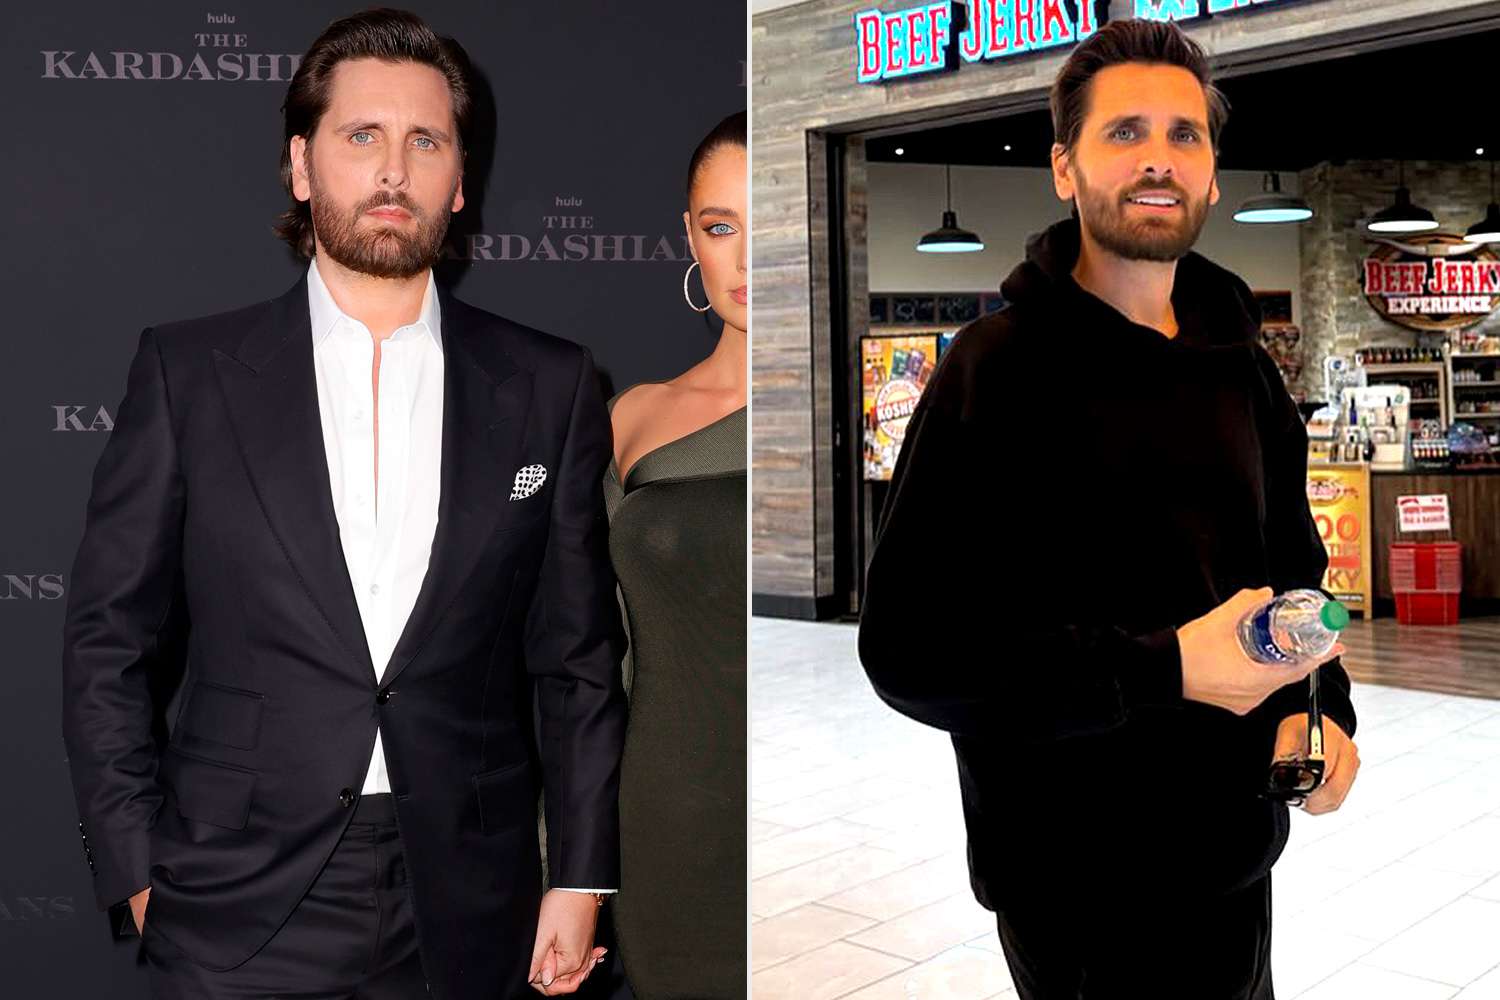 Scott Disick Shows Off Weight Loss After Kris Jenner Says He 'Really Struggled' Over the Last Year